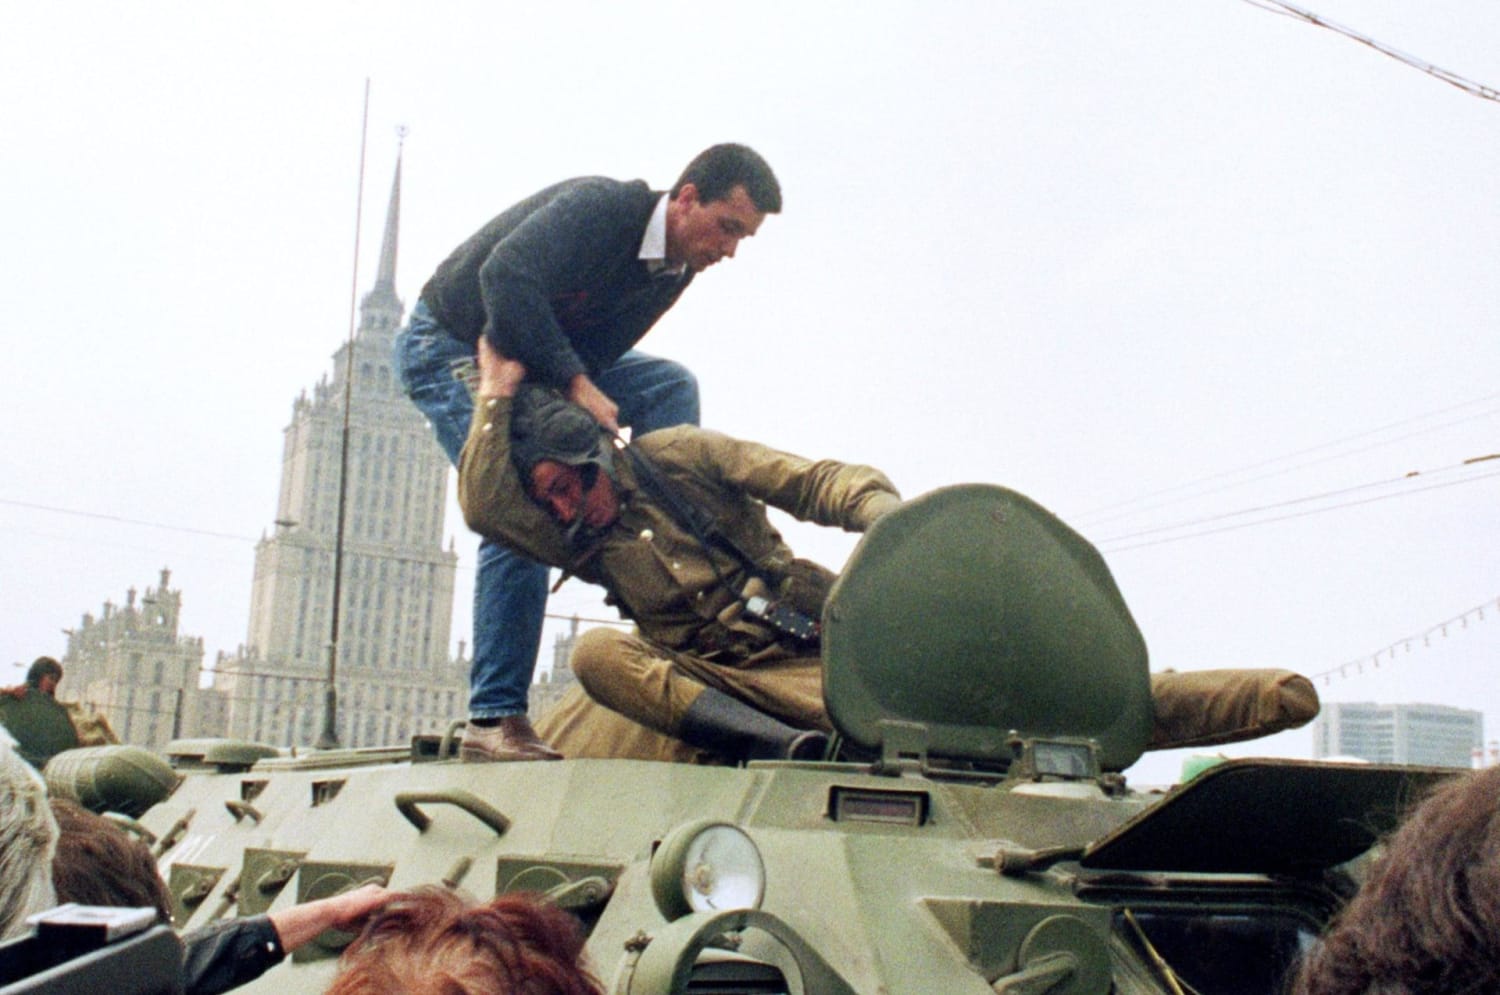 On August 19, 1991, a pro-democracy demonstrator fights with a Soviet soldier on top of a tank parked in front of the Russian Federation building after a coup toppled Soviet President Mikhail Gorbachev.